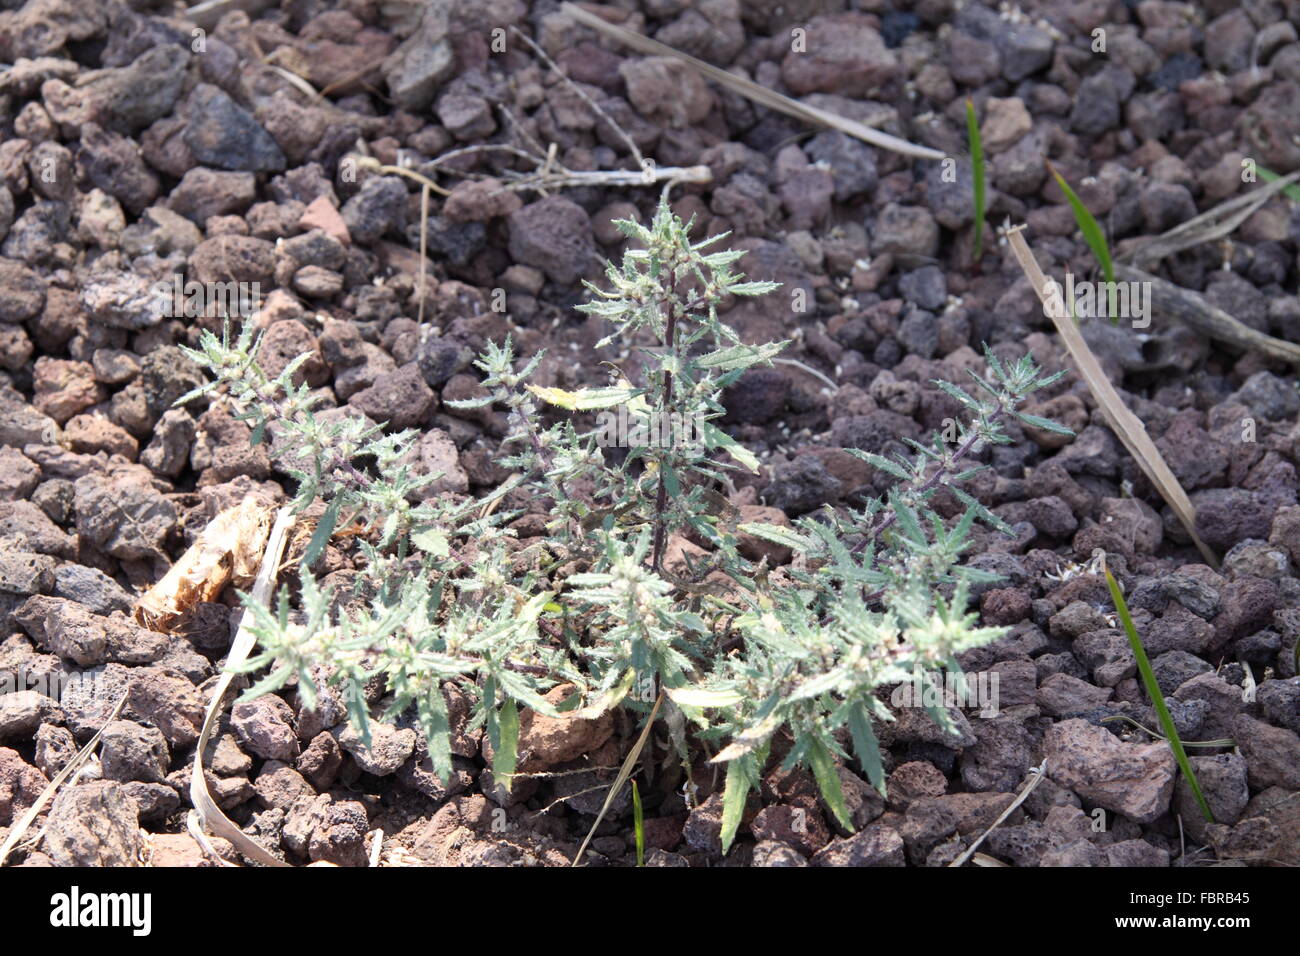 A member of the nettle family Forsskaolea angustifolia growing on bare ground in Gran Canaria Stock Photo